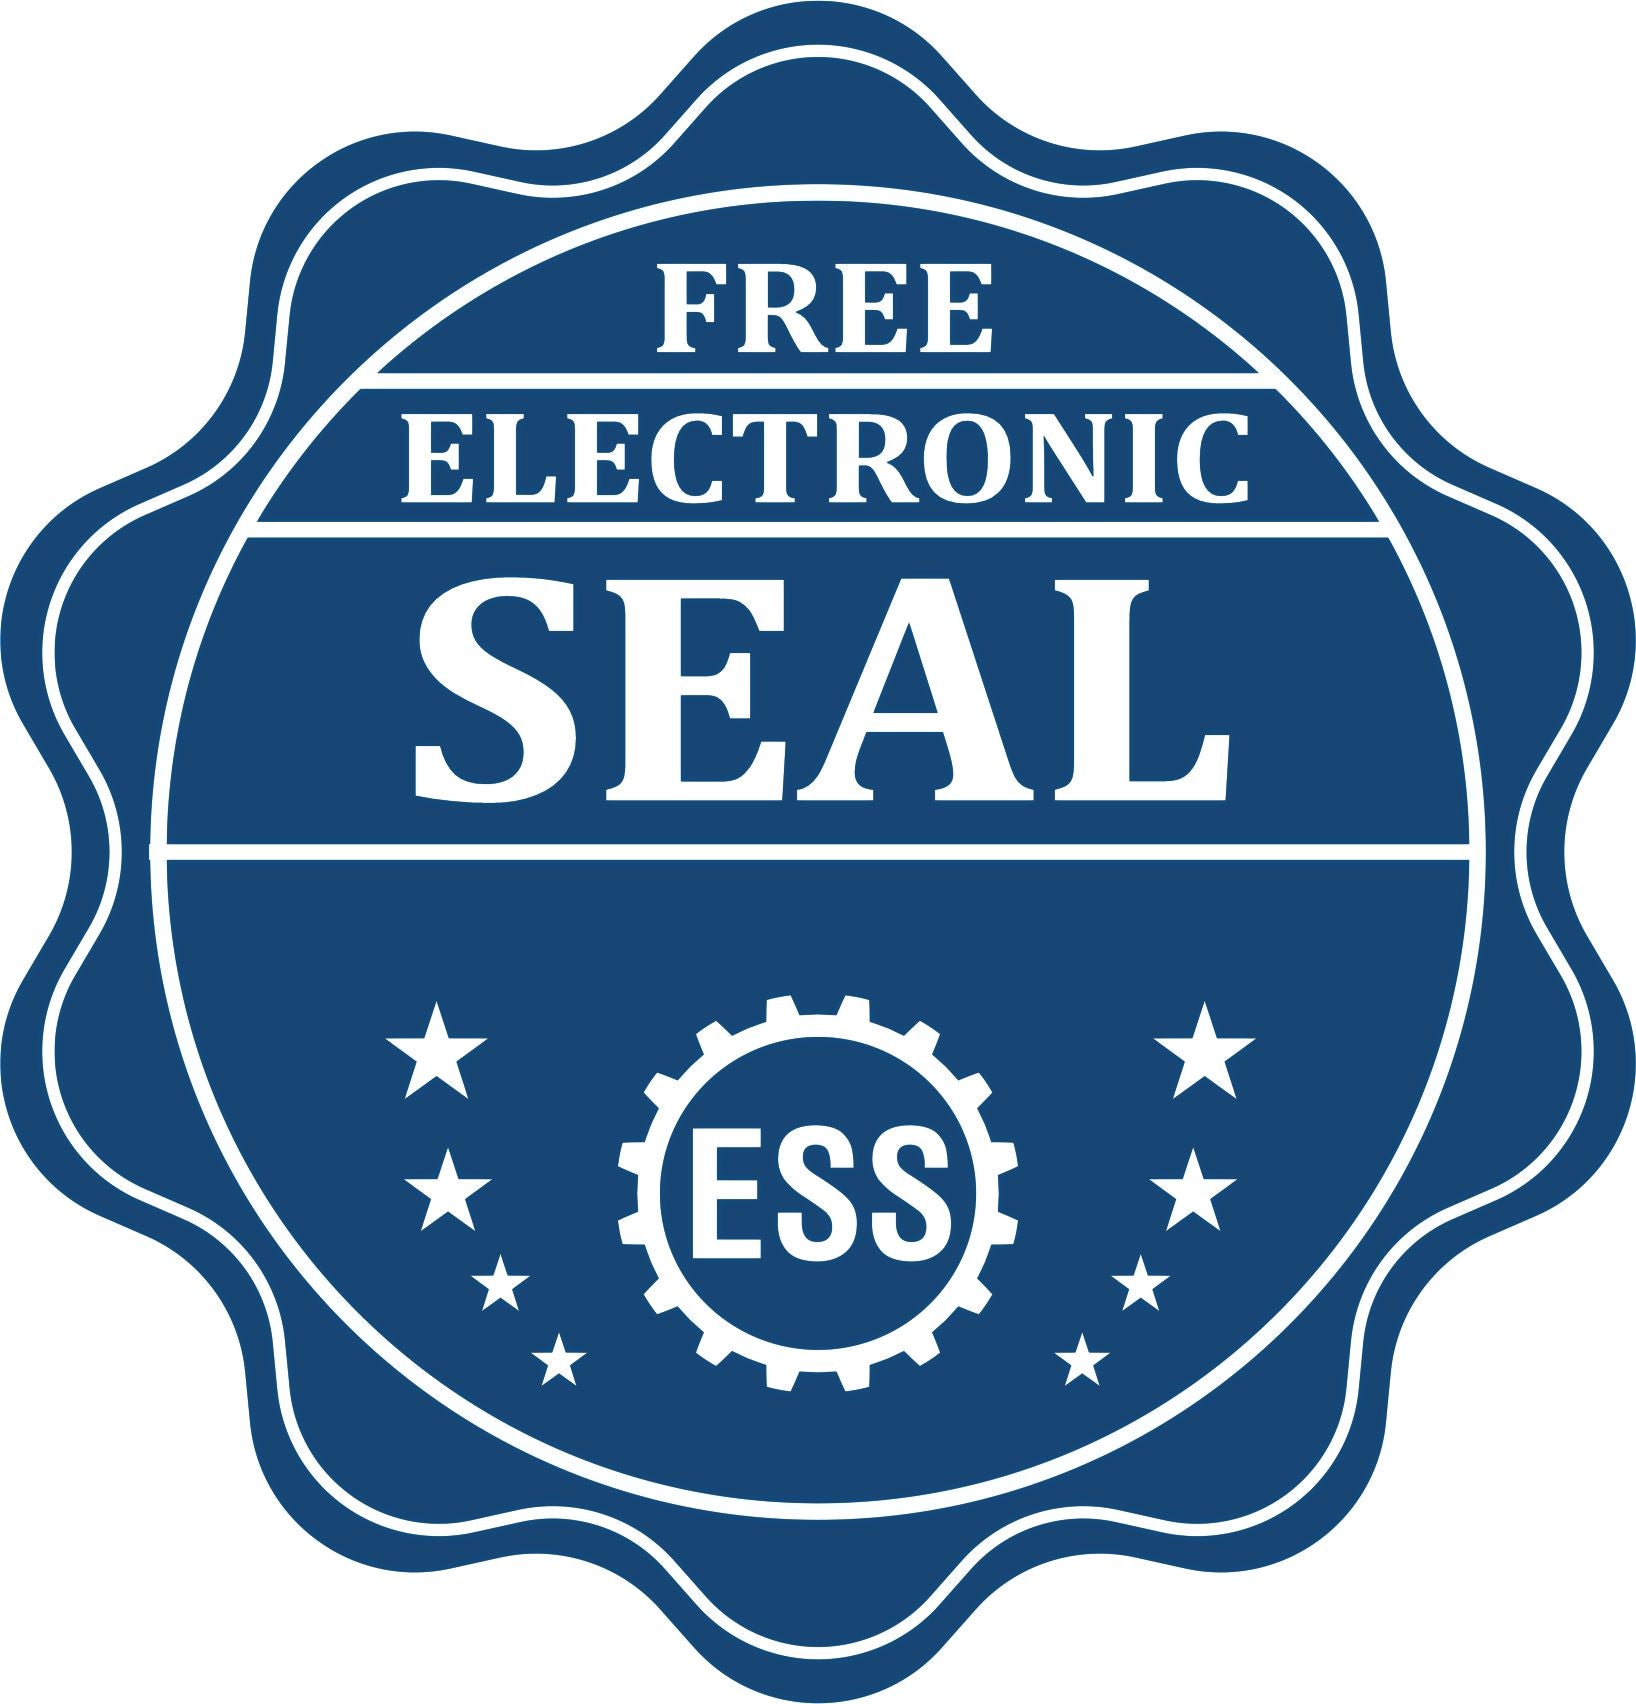 A badge showing a free electronic seal for the Hybrid North Carolina Geologist Seal with stars and the ESS gear on the emblem.